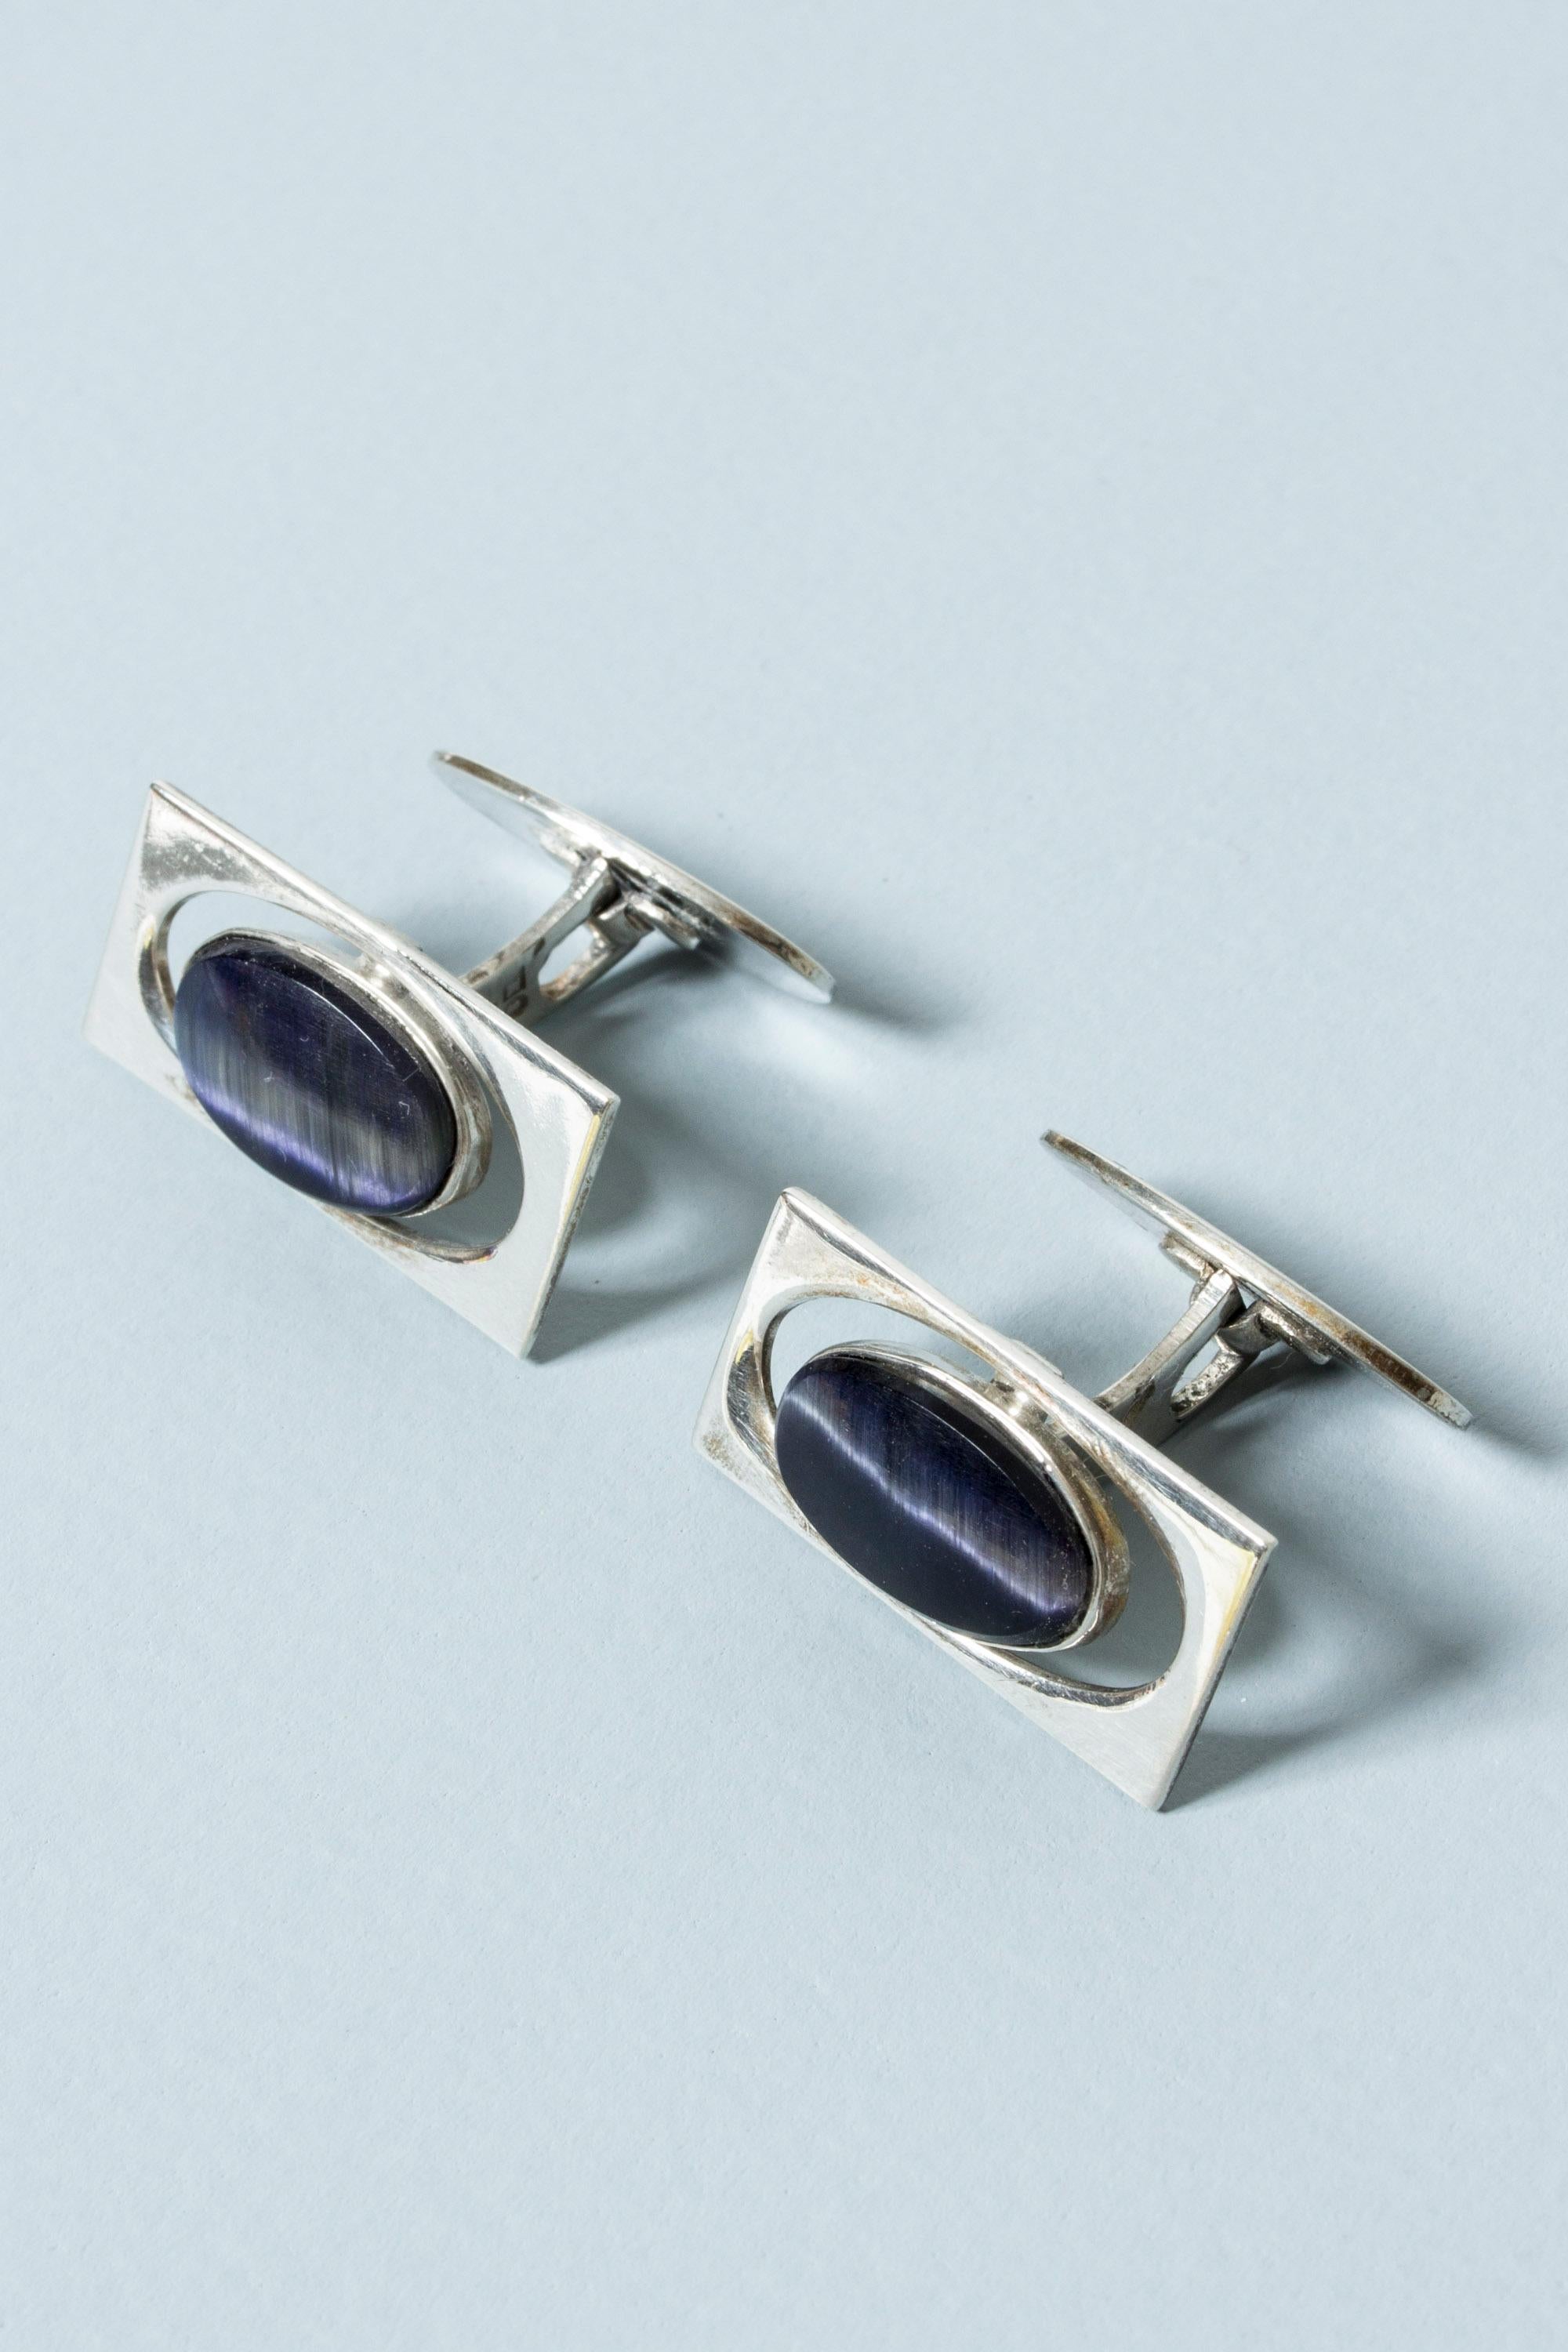 Pair of elegant silver cufflinks from Kaplans, with oval purple semiprecious stones in a cutout frame. Mesmerizing stones with a white sheen through the middle.